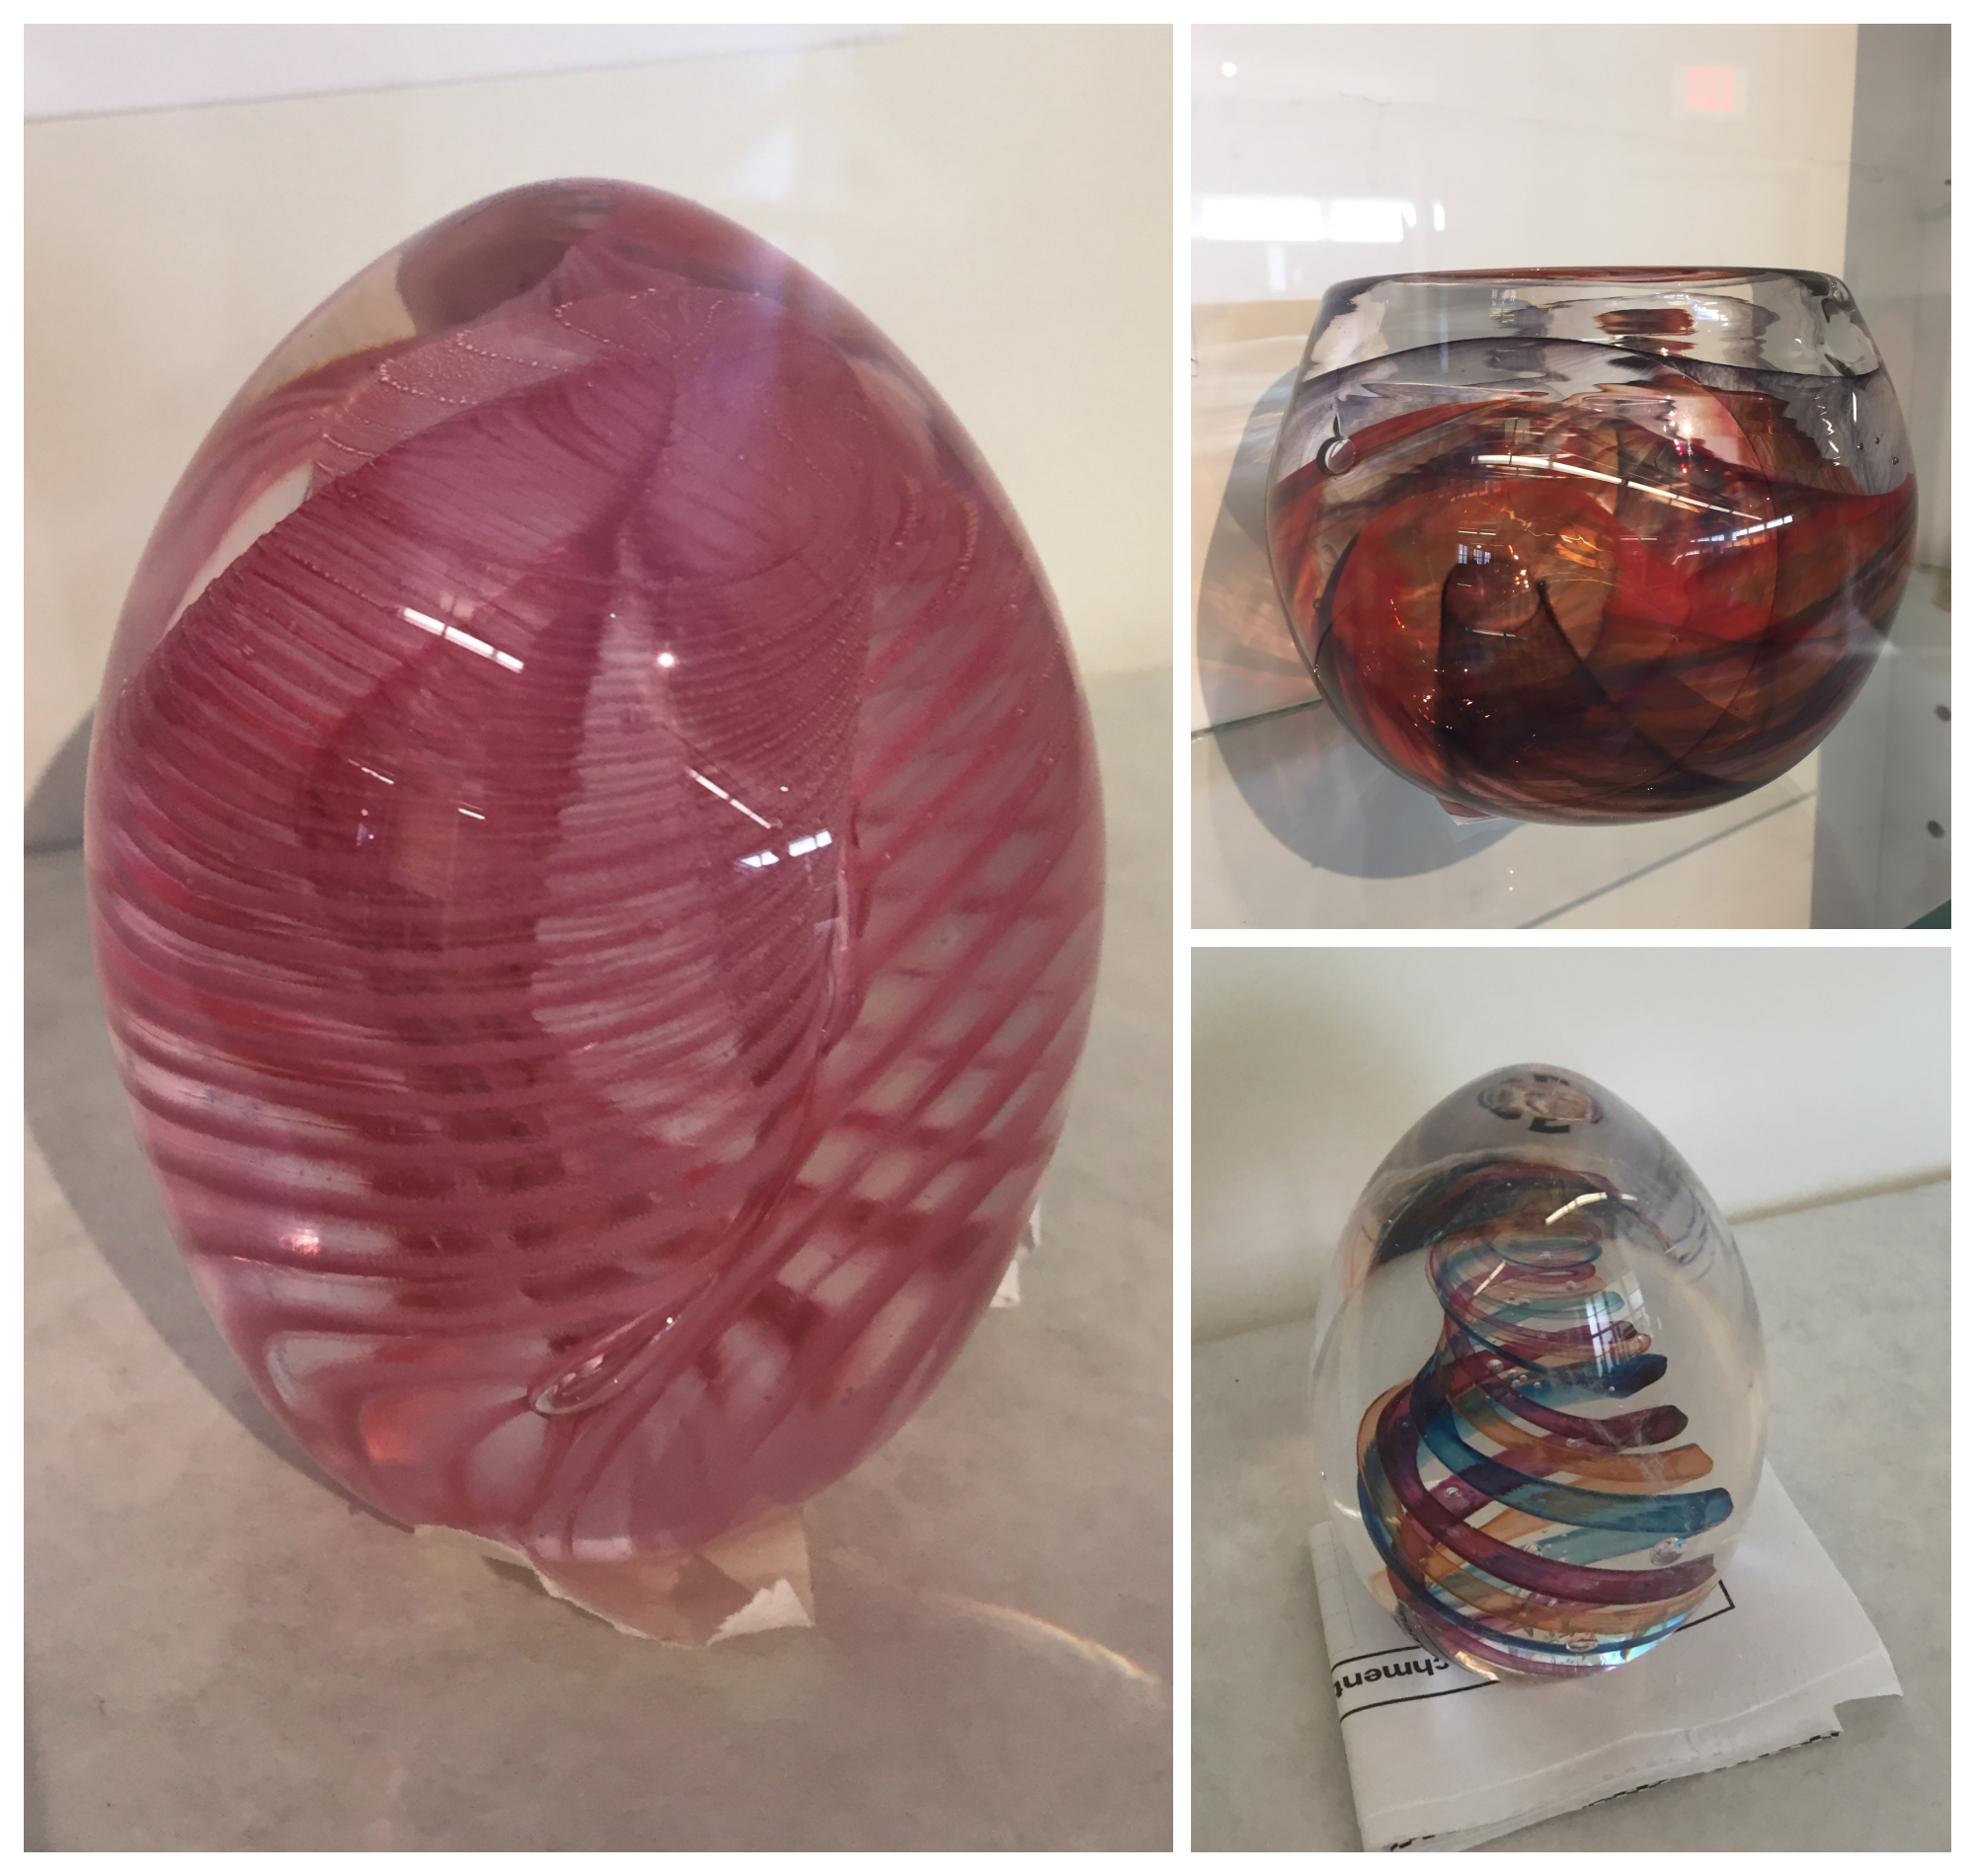 Left: Strawberry Sorbet, by Brenda Kutz. Top: Concentric, by Keith Kutz. Bottom: Helix, by Brenda Kutz.